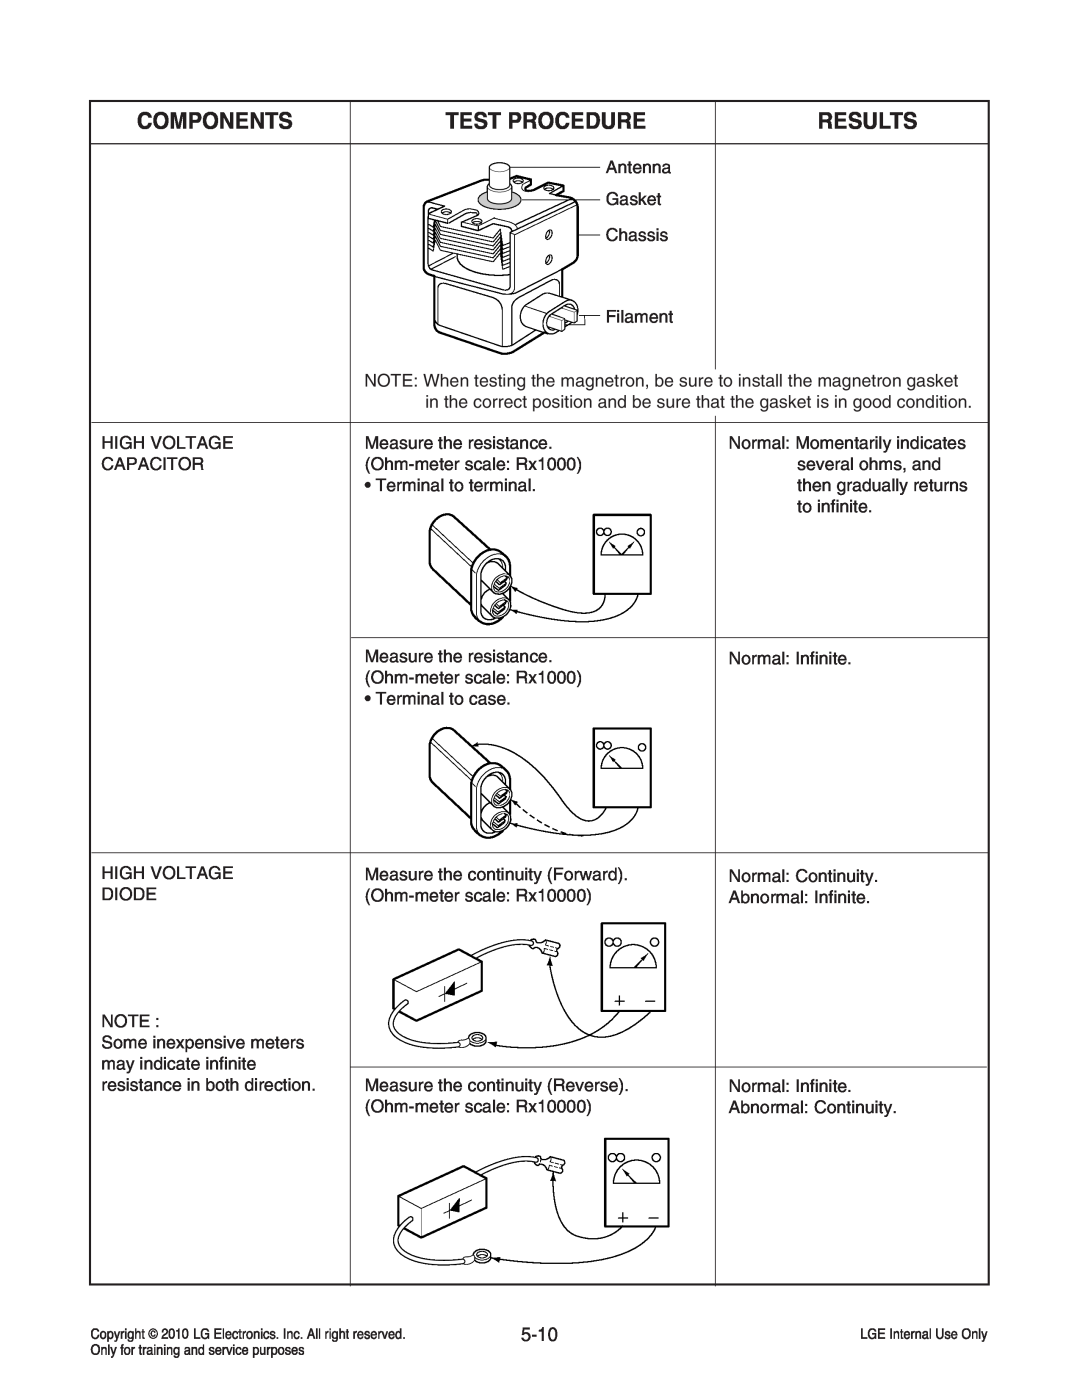 Frigidaire LCRT2010ST service manual Components, Test Procedure, Results, 5-10 